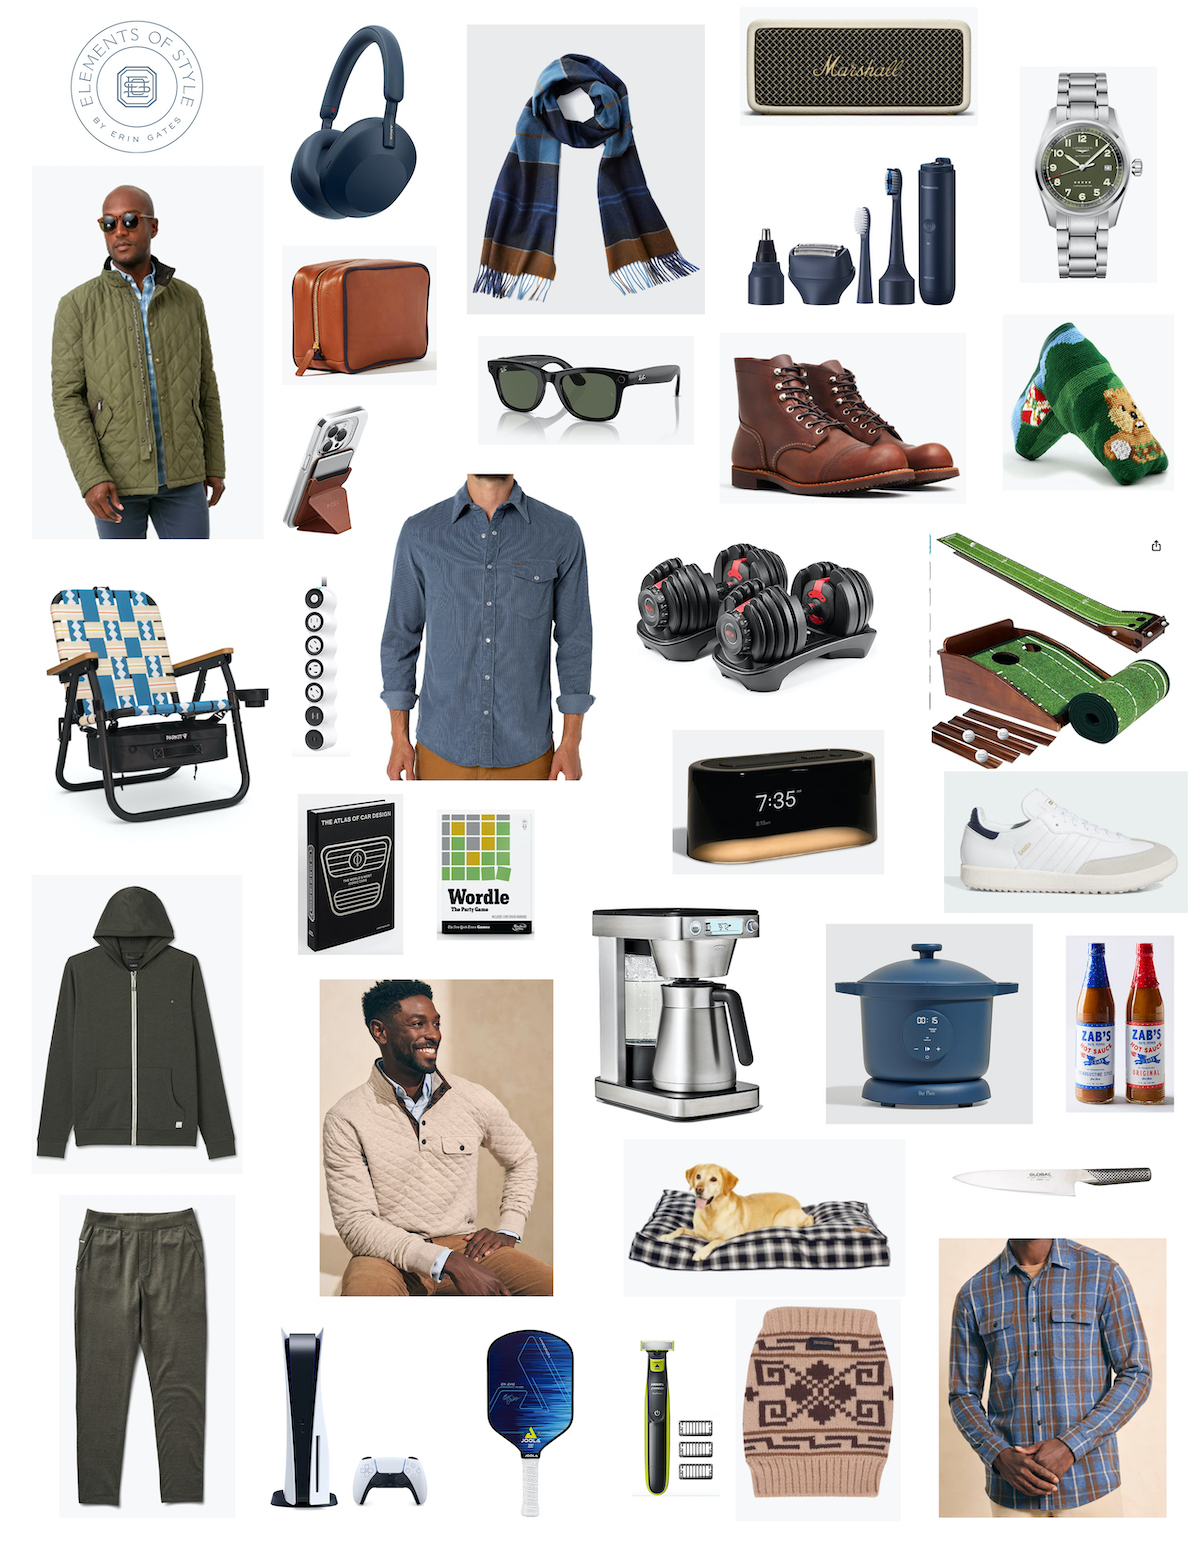 Gift Ideas for Him Under $100, Gift Guide